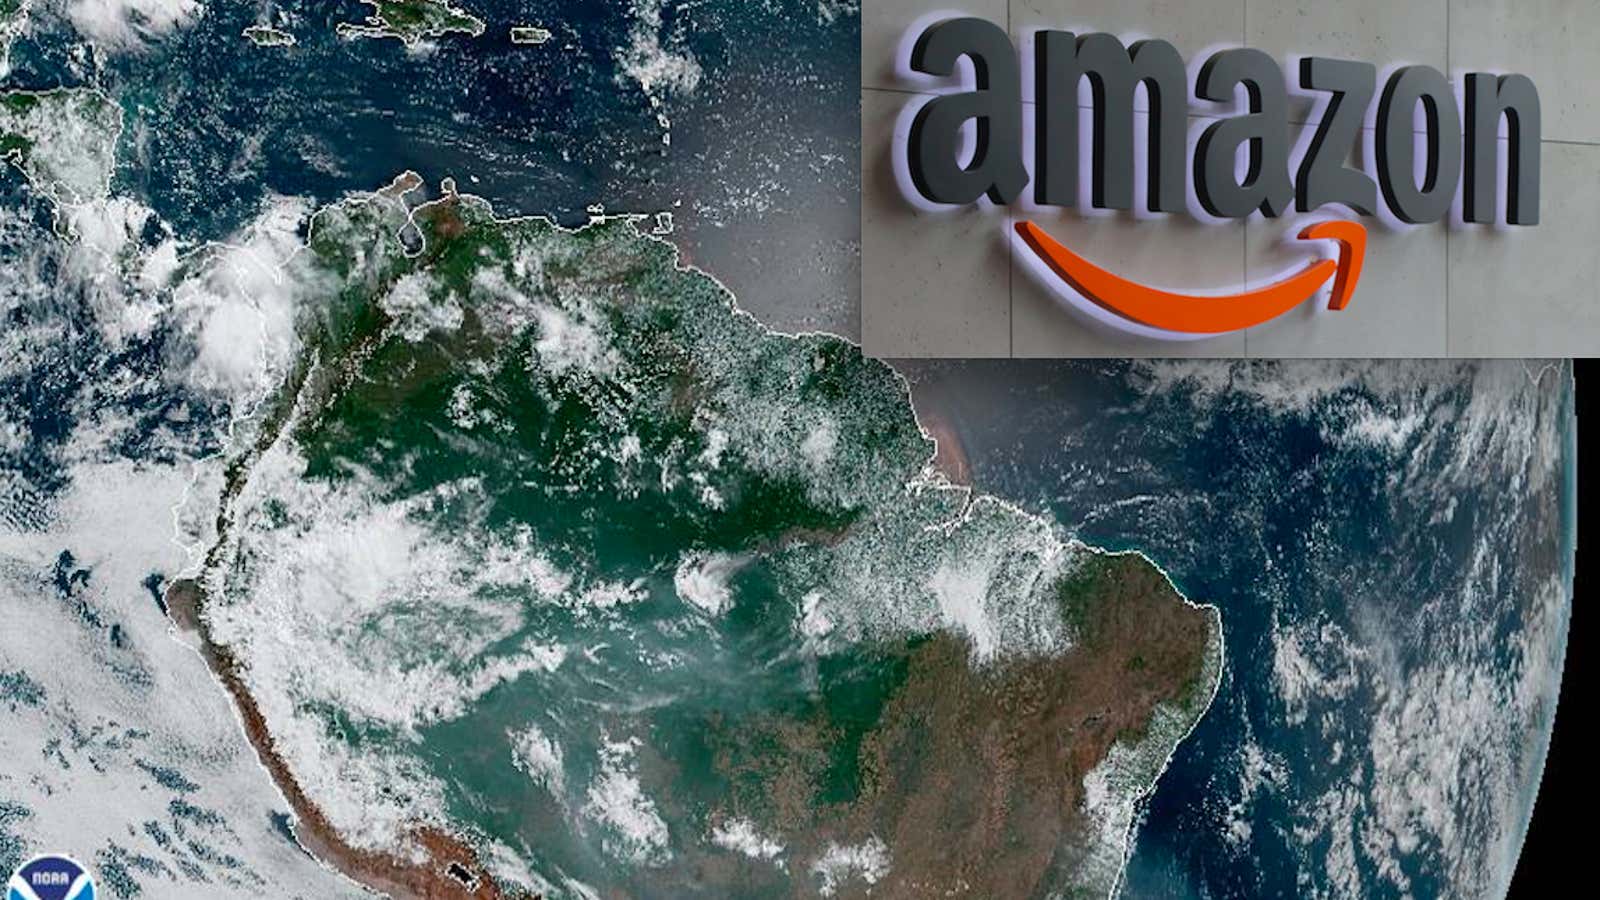 The Amazon rainforest is burning—but Google News just wants to tell you about Amazon.com’s tablet.